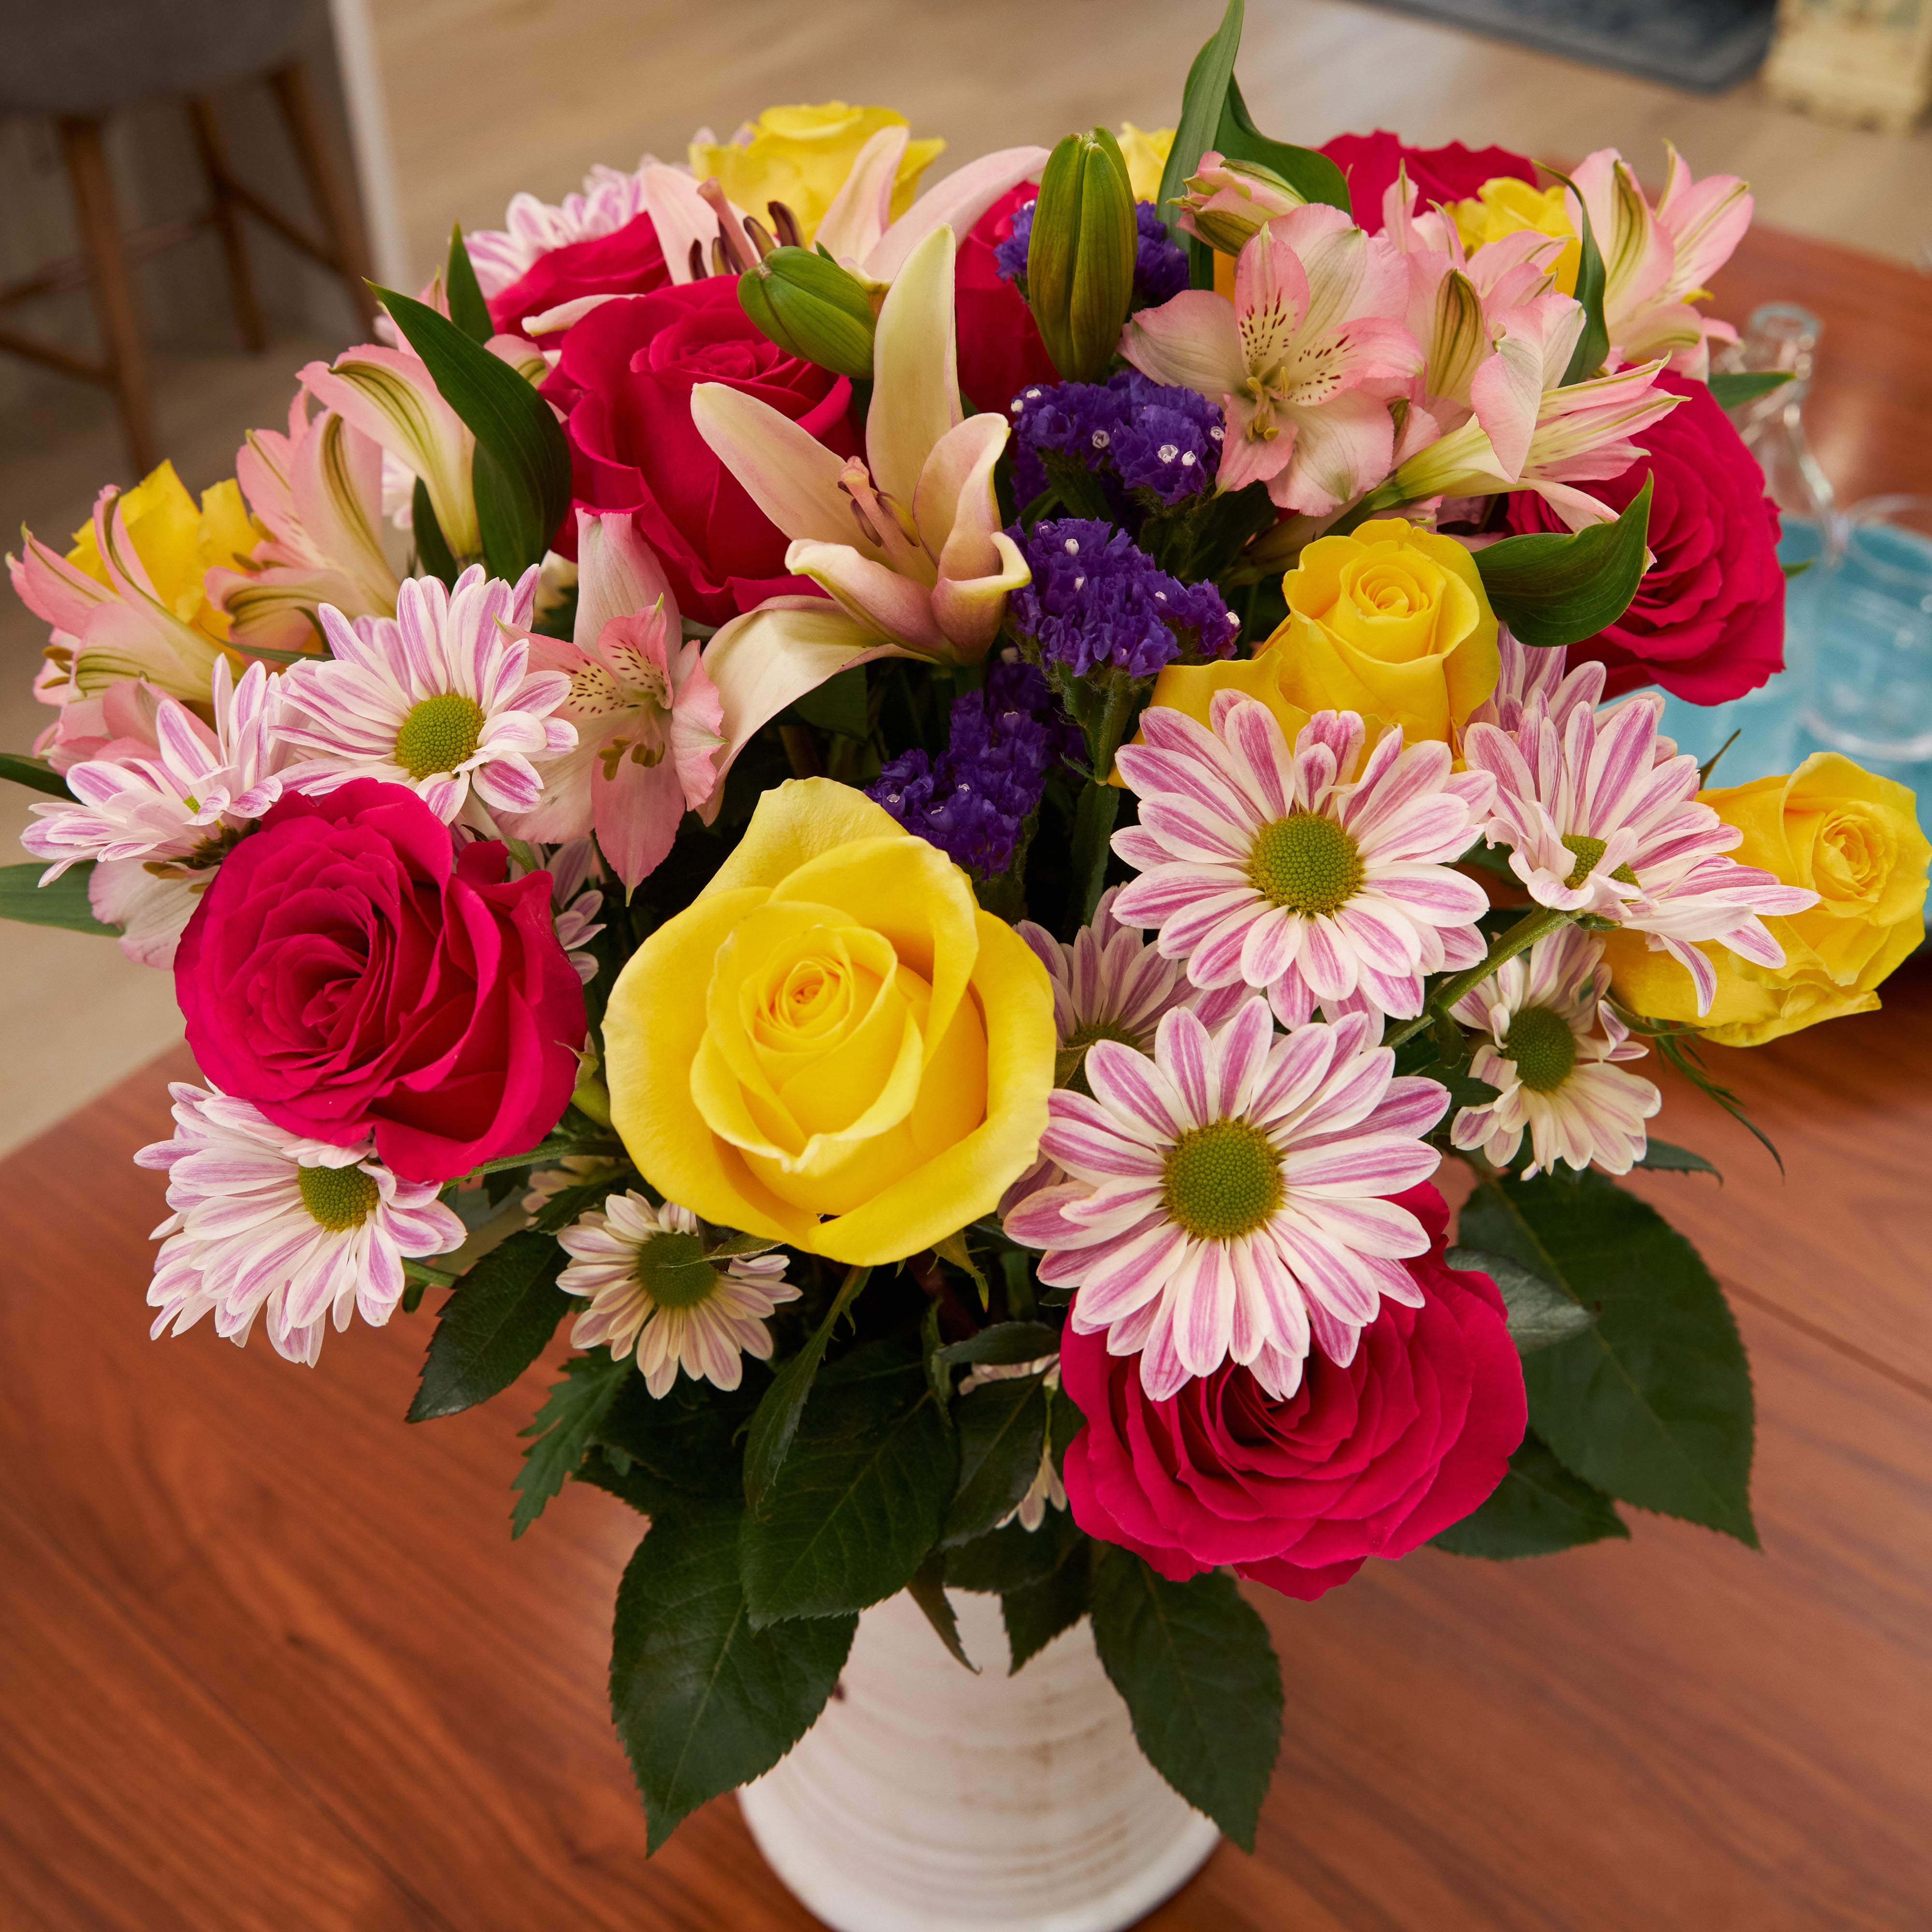 Fresh-Cut Extra-Large Premium Rose and Flower Bouquet, Minimum of 17 Stems,  Colors Vary